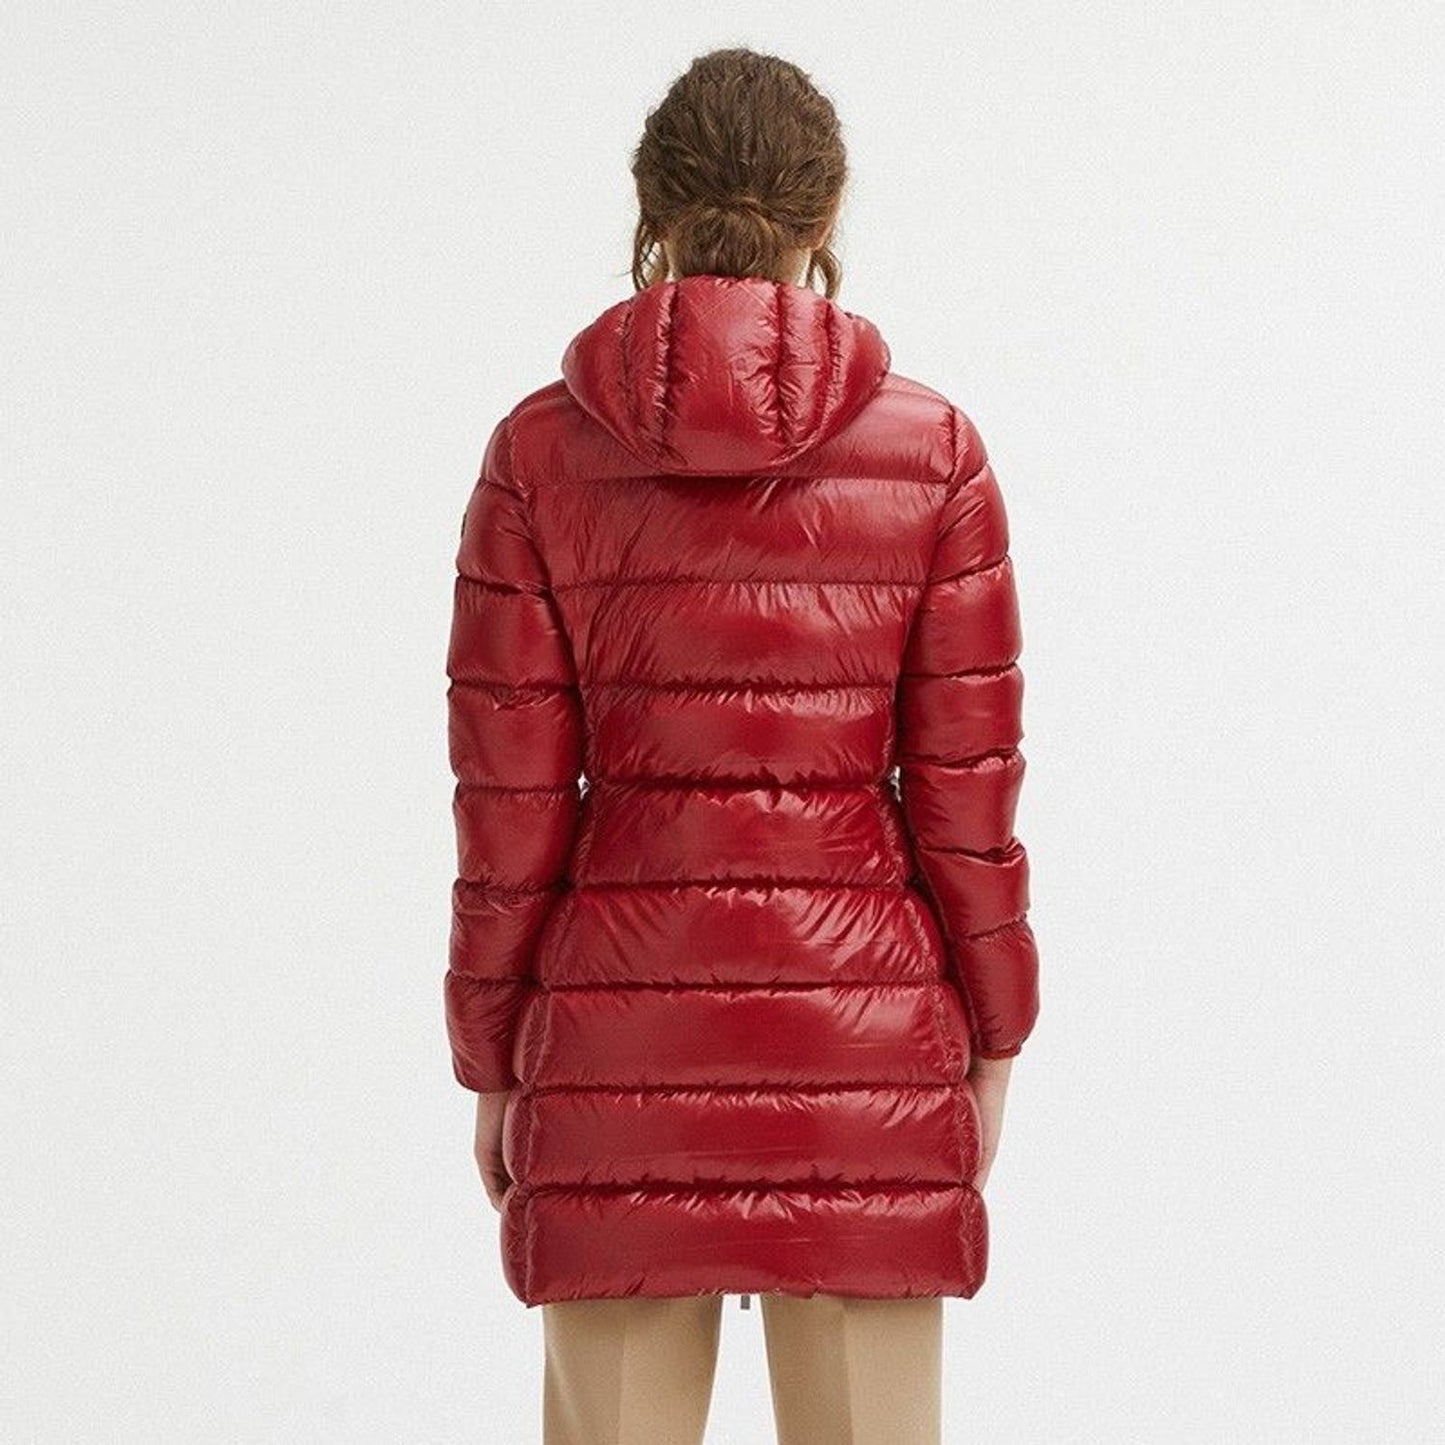 Centogrammi Reversible Goose Down Long Jacket in Pink red-nylon-jackets-coat-3 product-8316-1574174834-10-d17f9a8f-69a.jpg